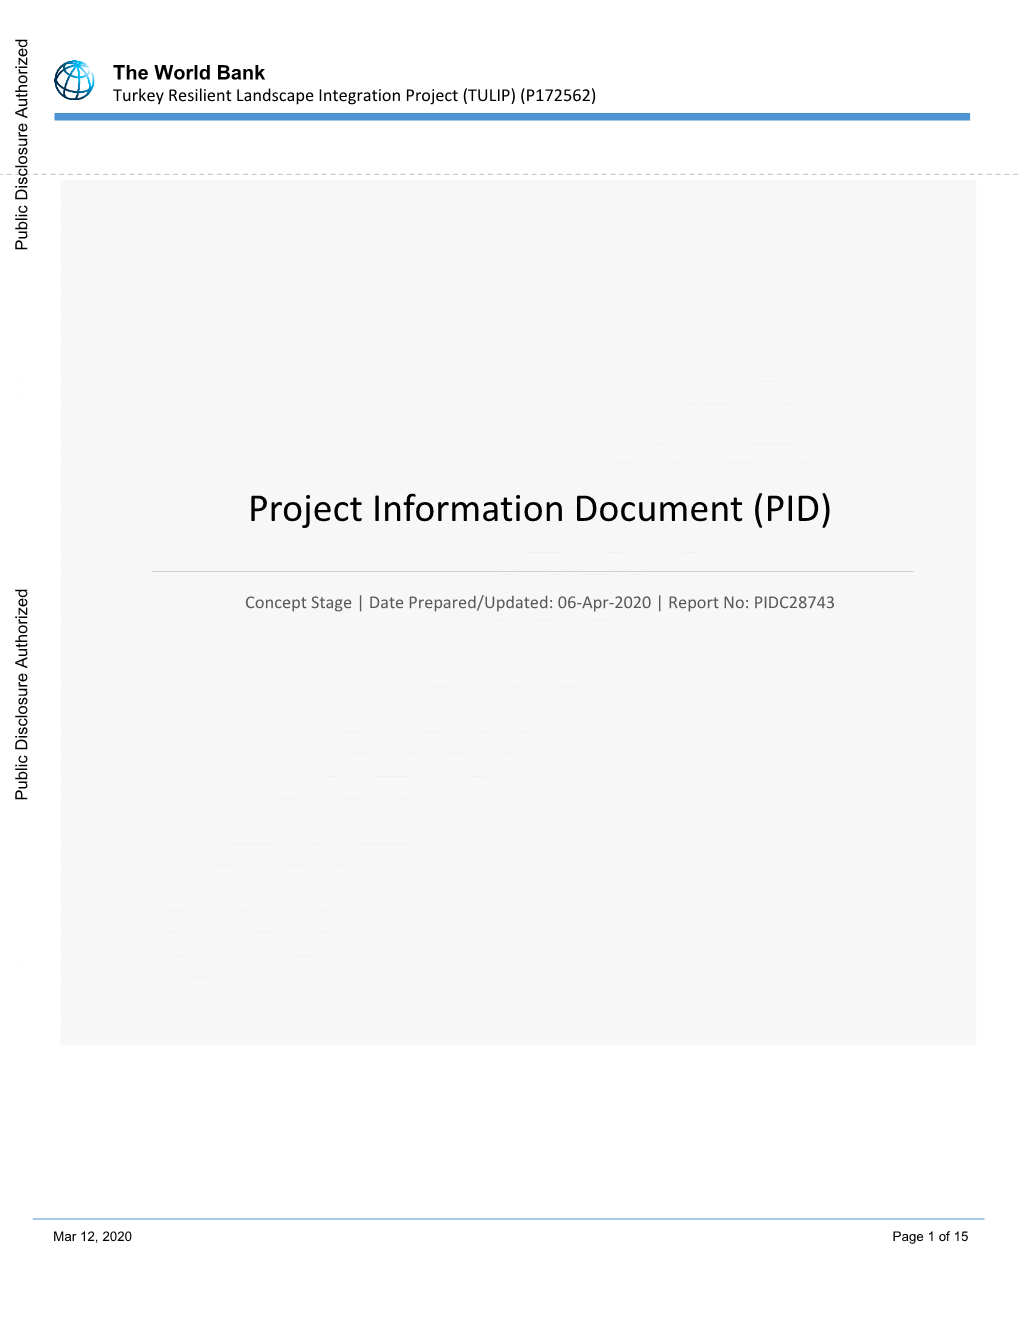 Concept Project Information Document